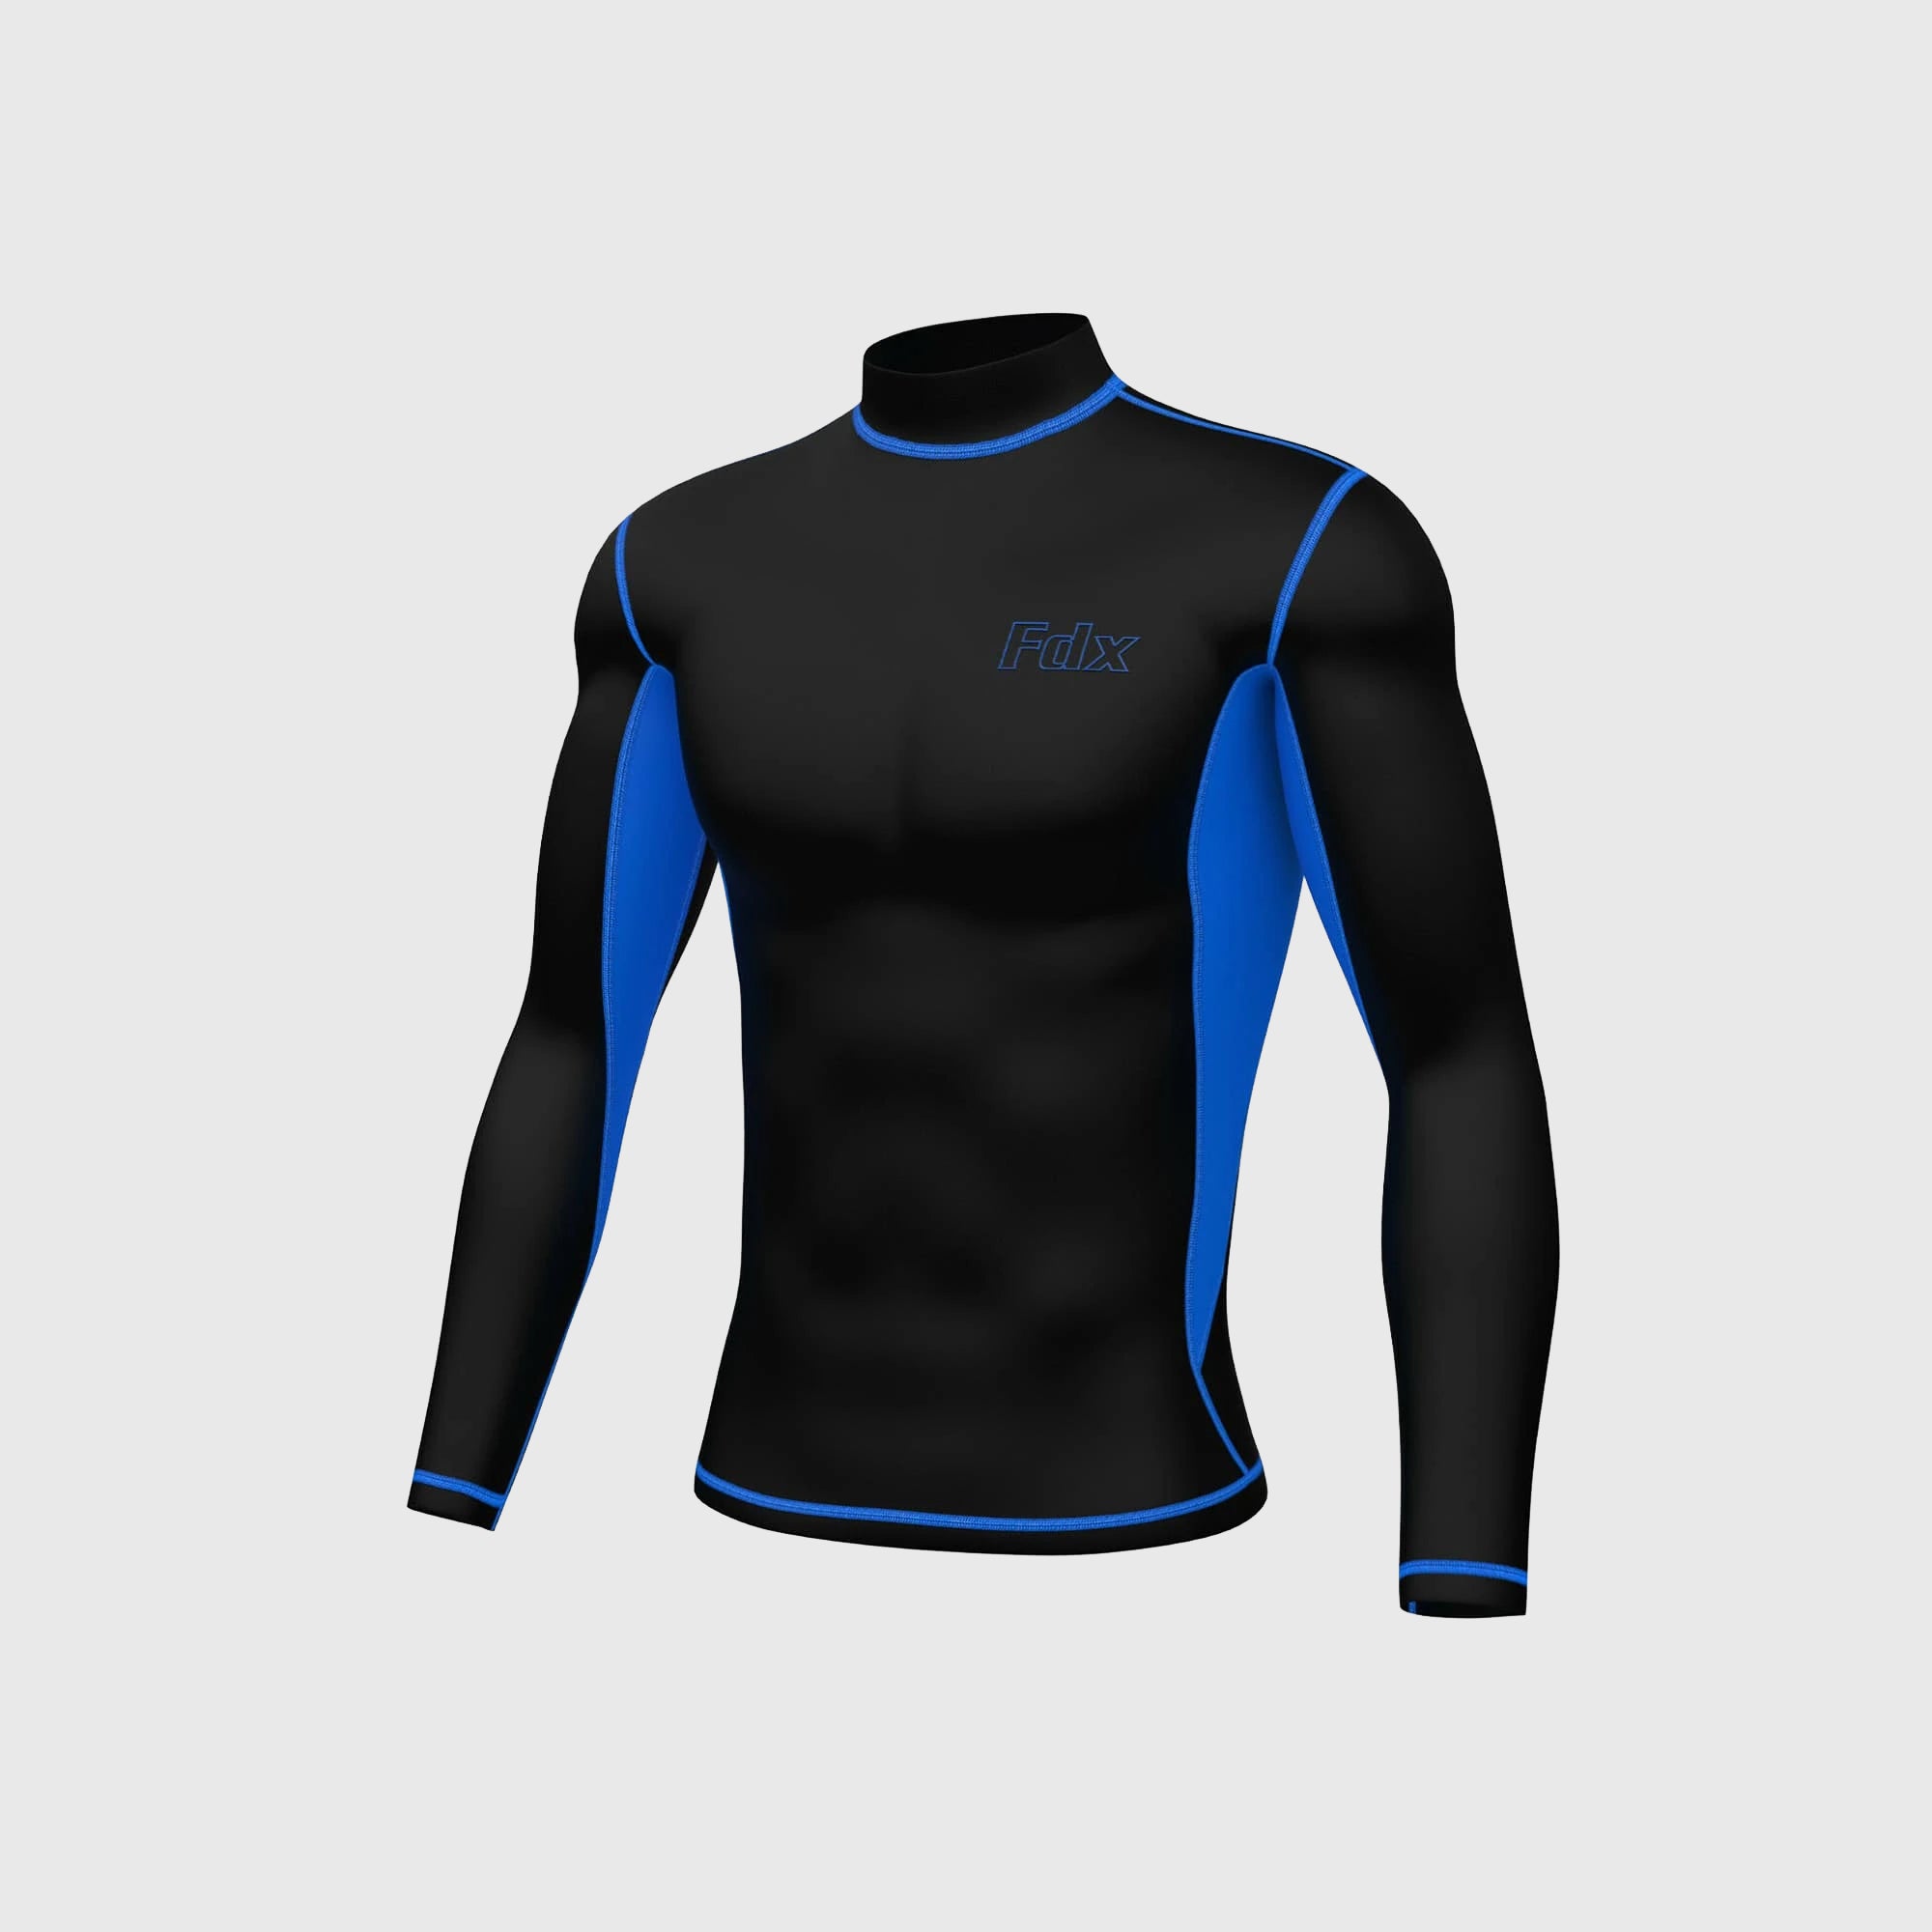 Fdx Mens Black & Blue Long Sleeve Compression Top Running Gym Workout Wear Rash Guard Stretchable Breathable - Inorex